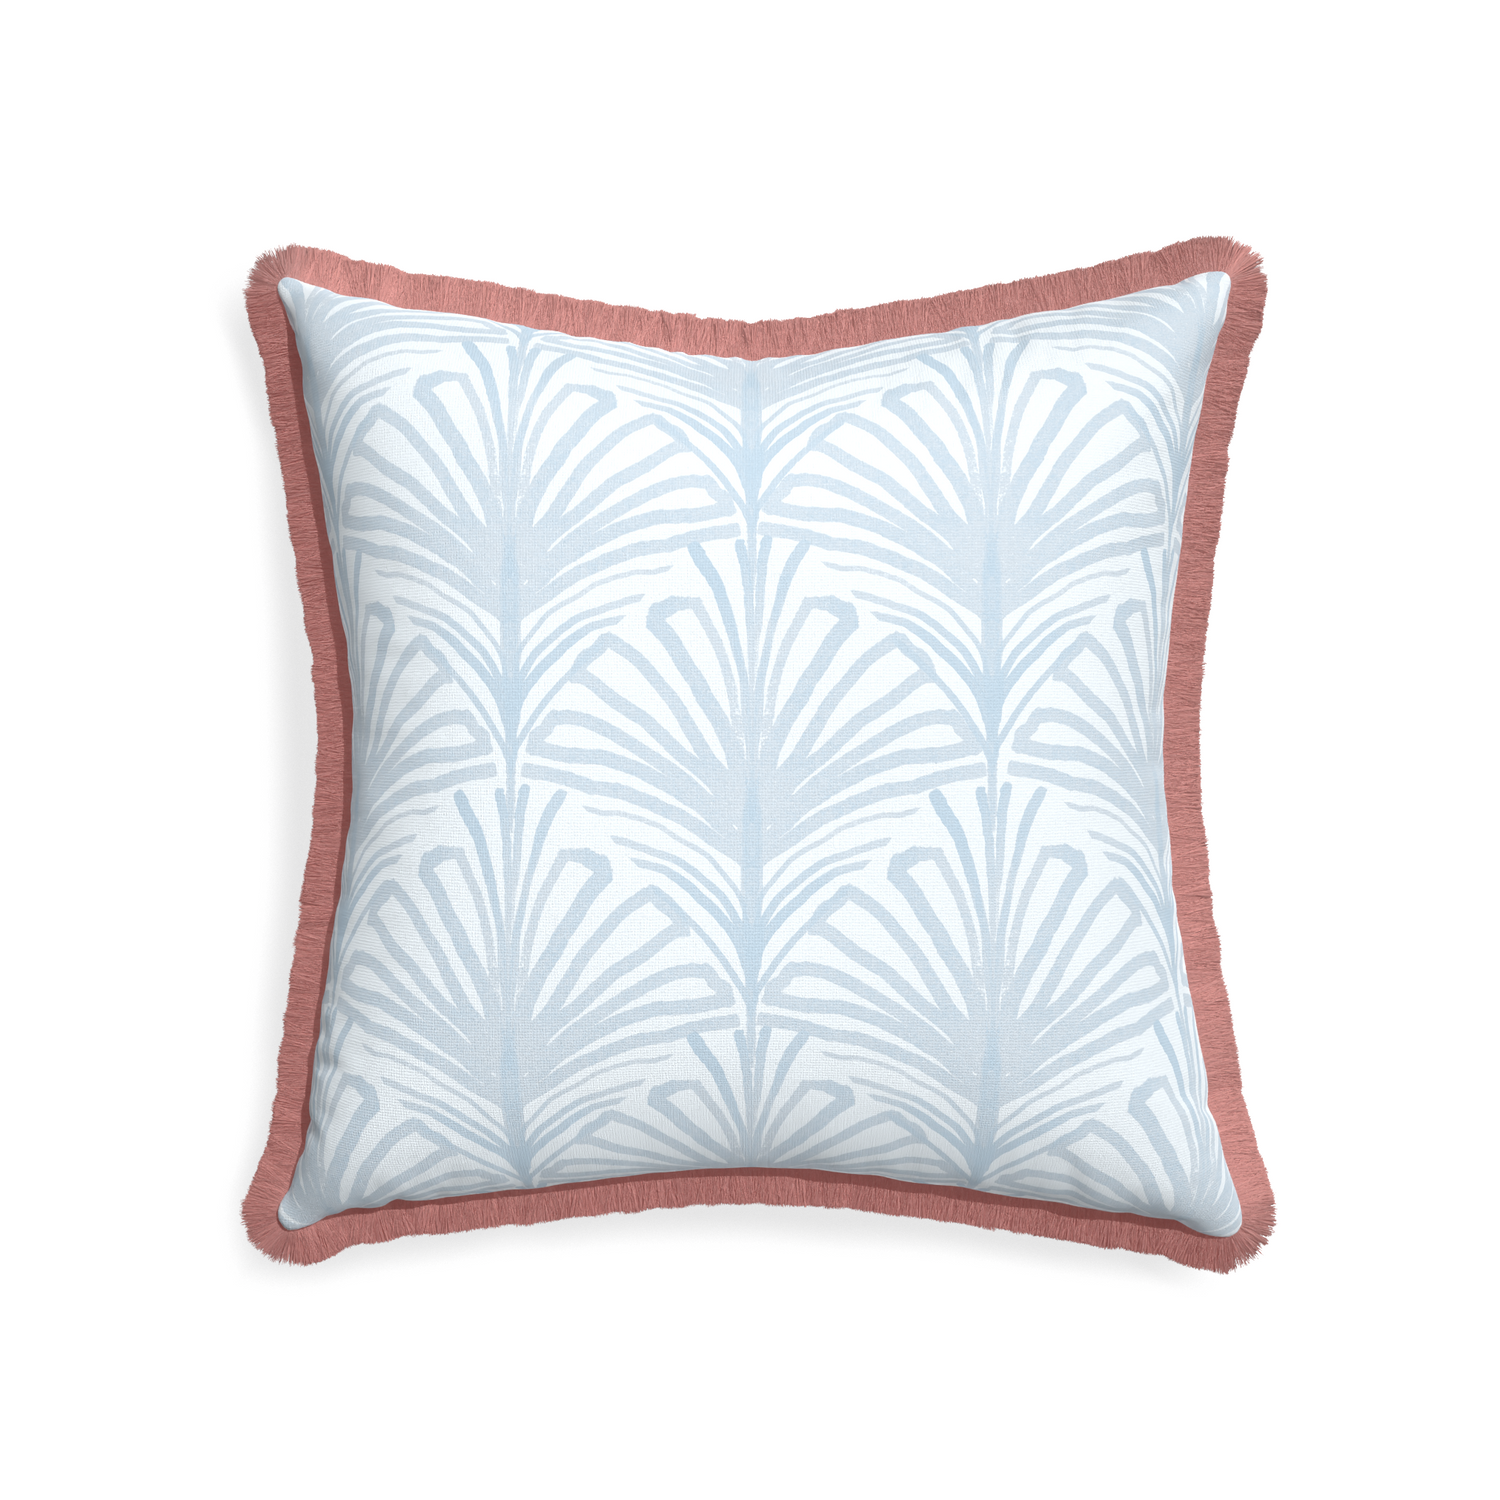 22-square suzy sky custom pillow with d fringe on white background